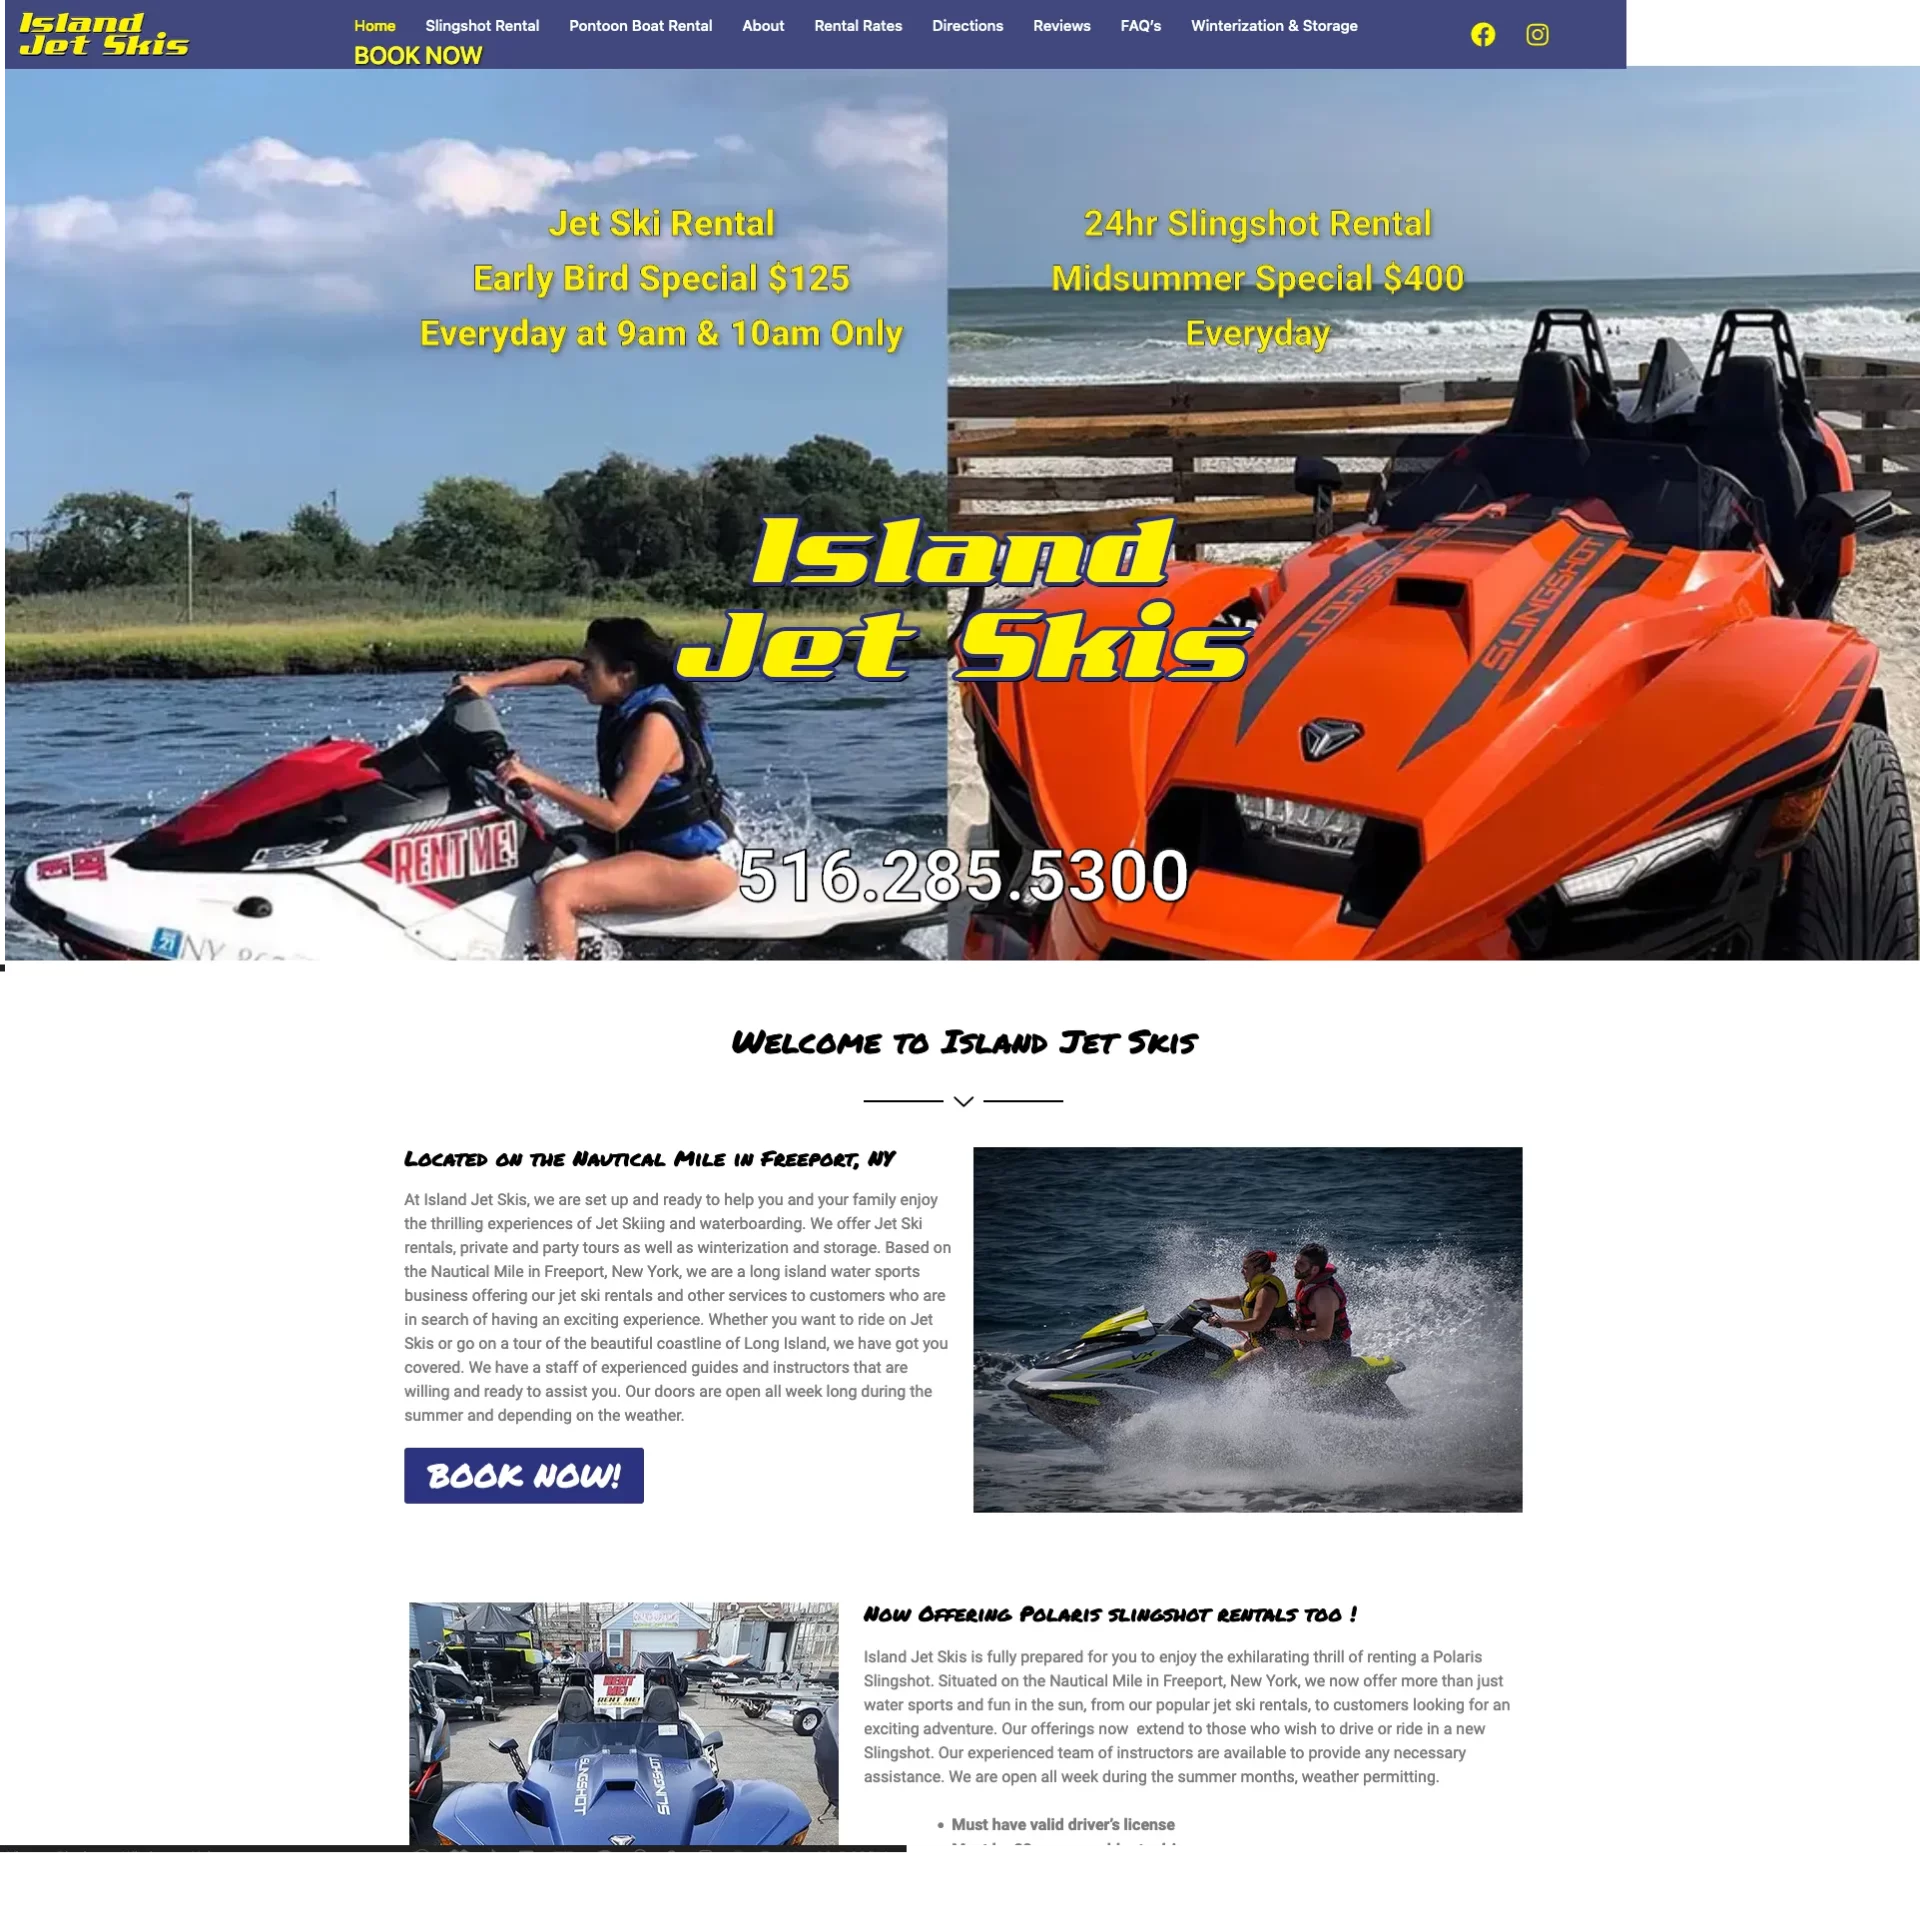 view of the Island Jet Skis website